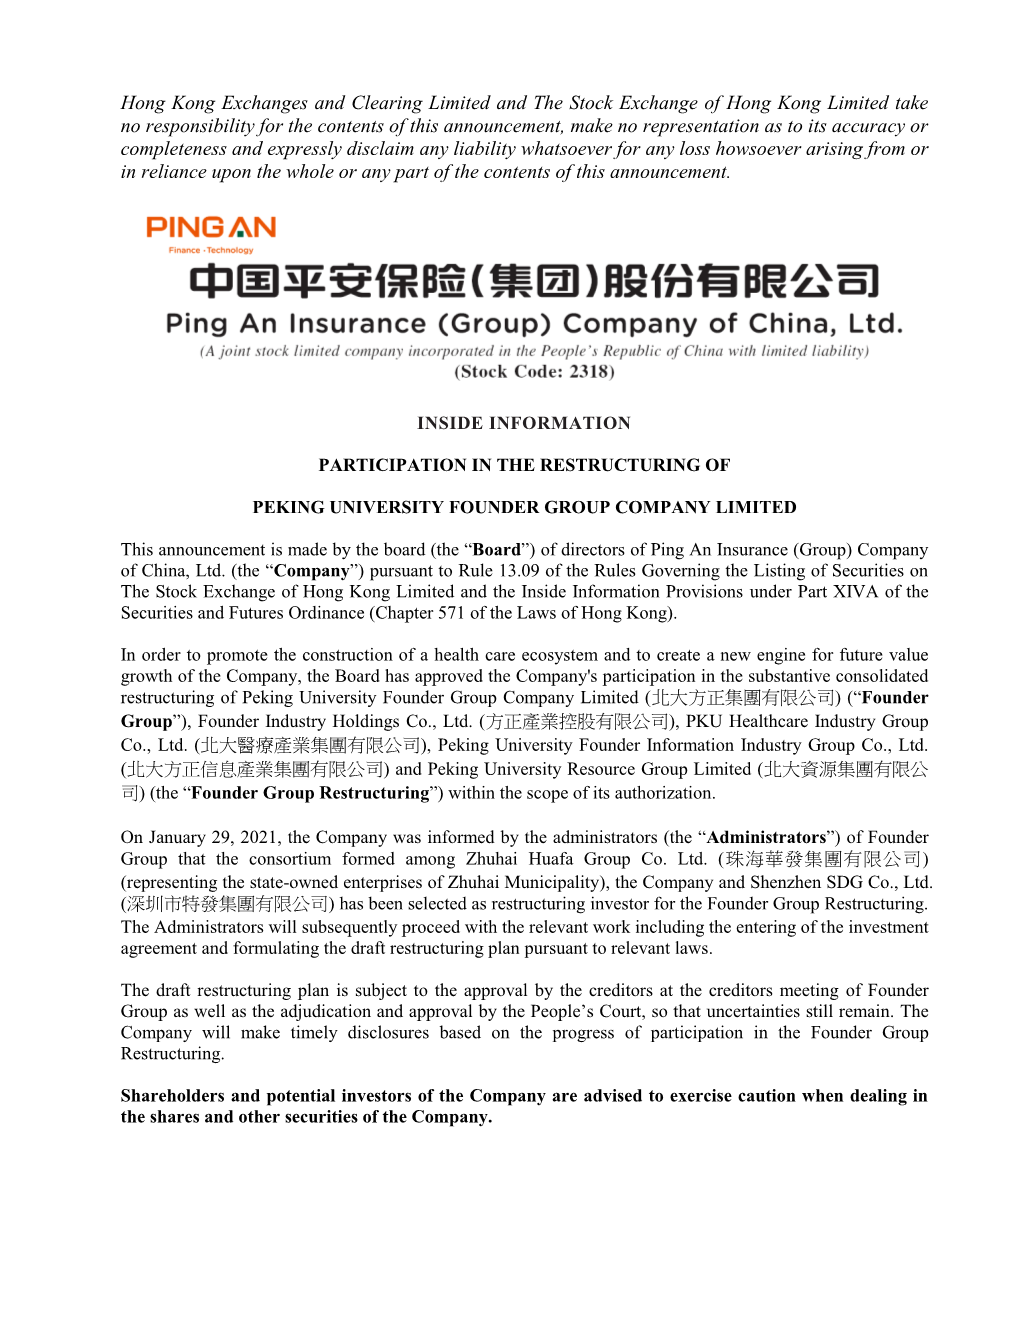 Participation in the Restructuring of Peking University Founder Group